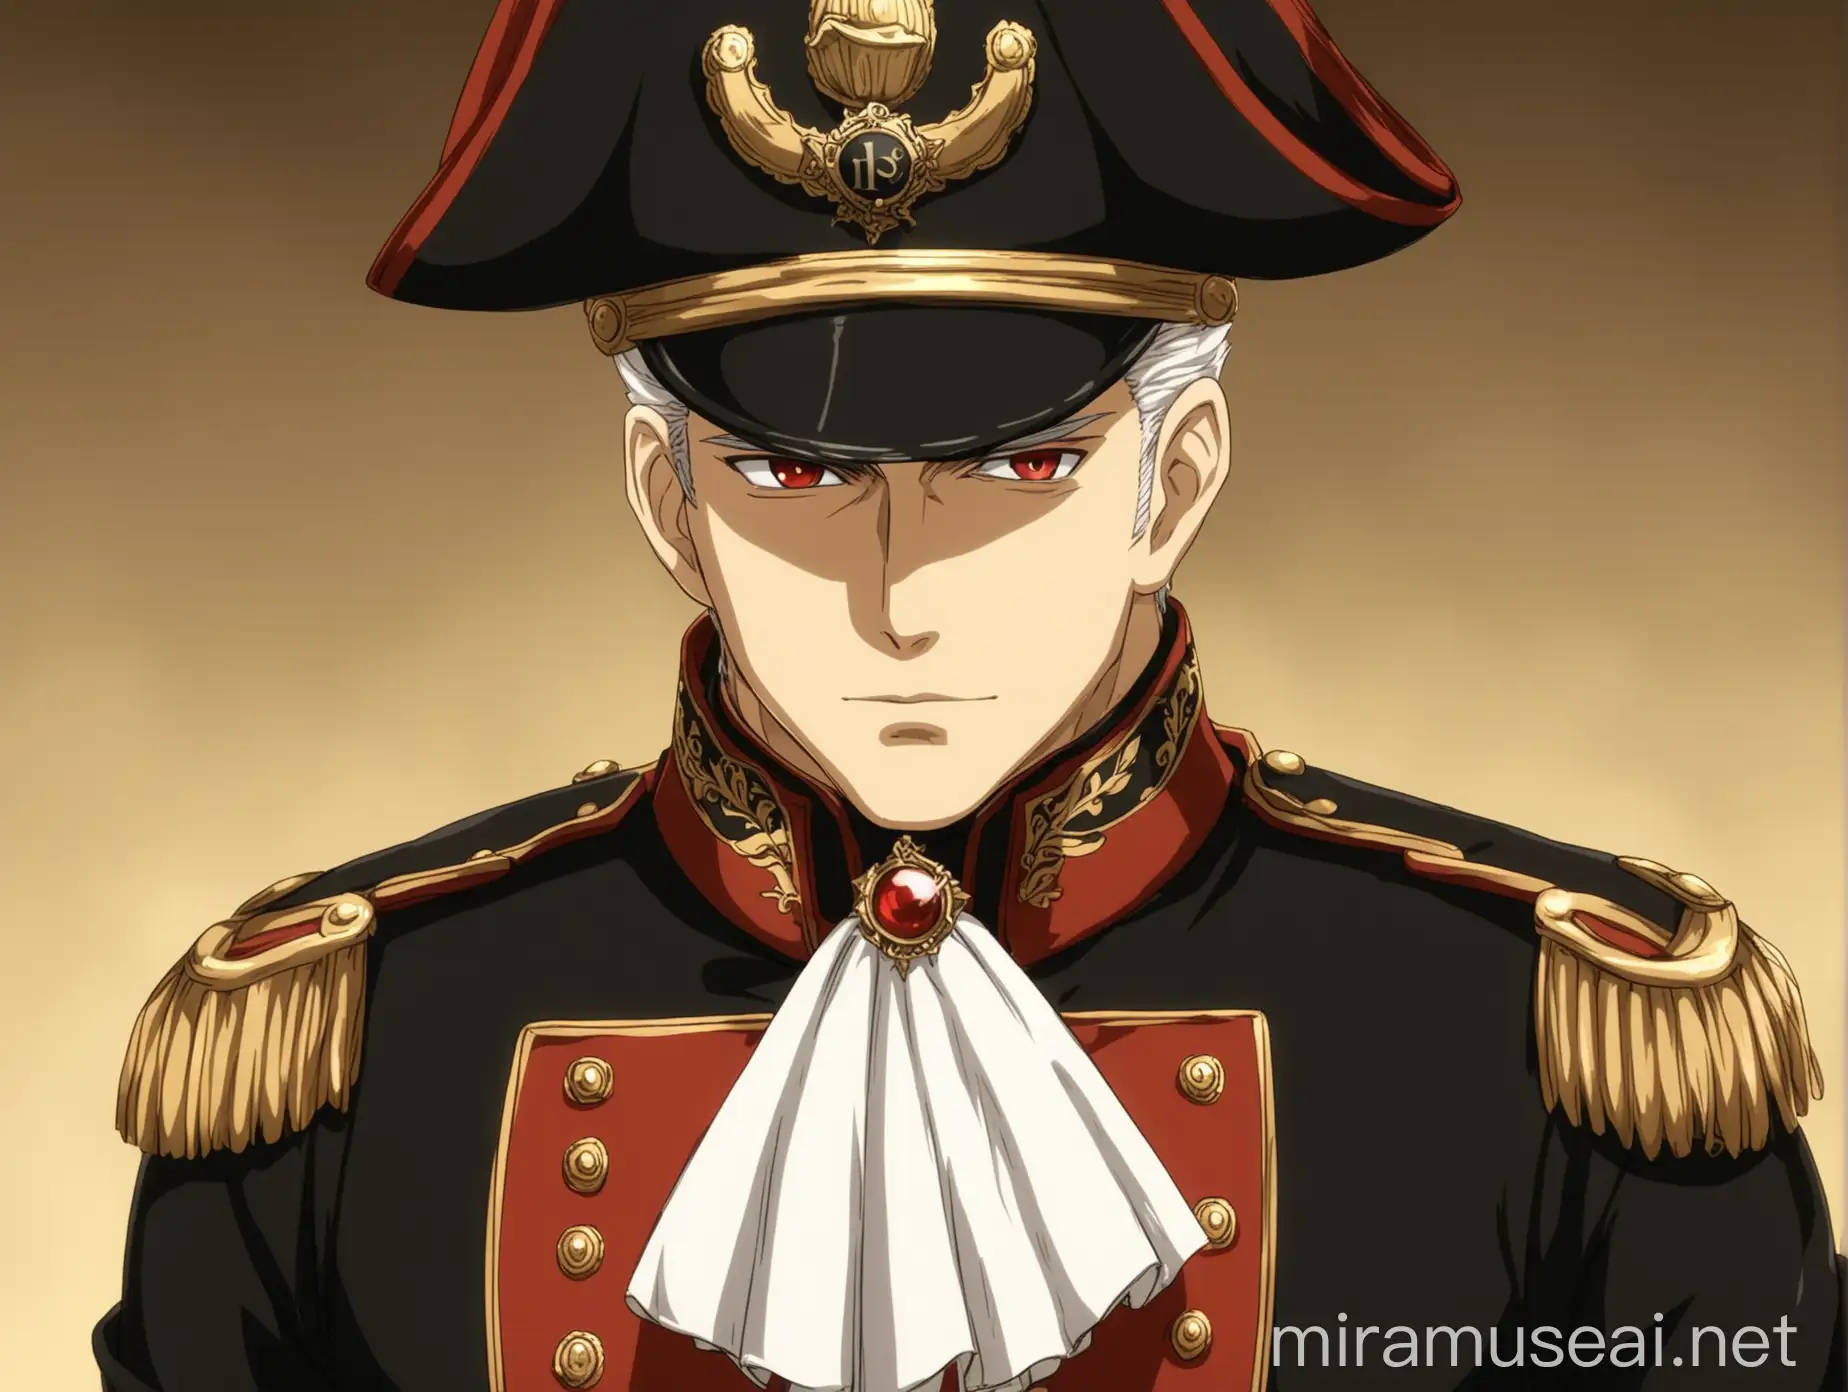 Fantasy Marine Man in Black and Red Victorian Military Uniform